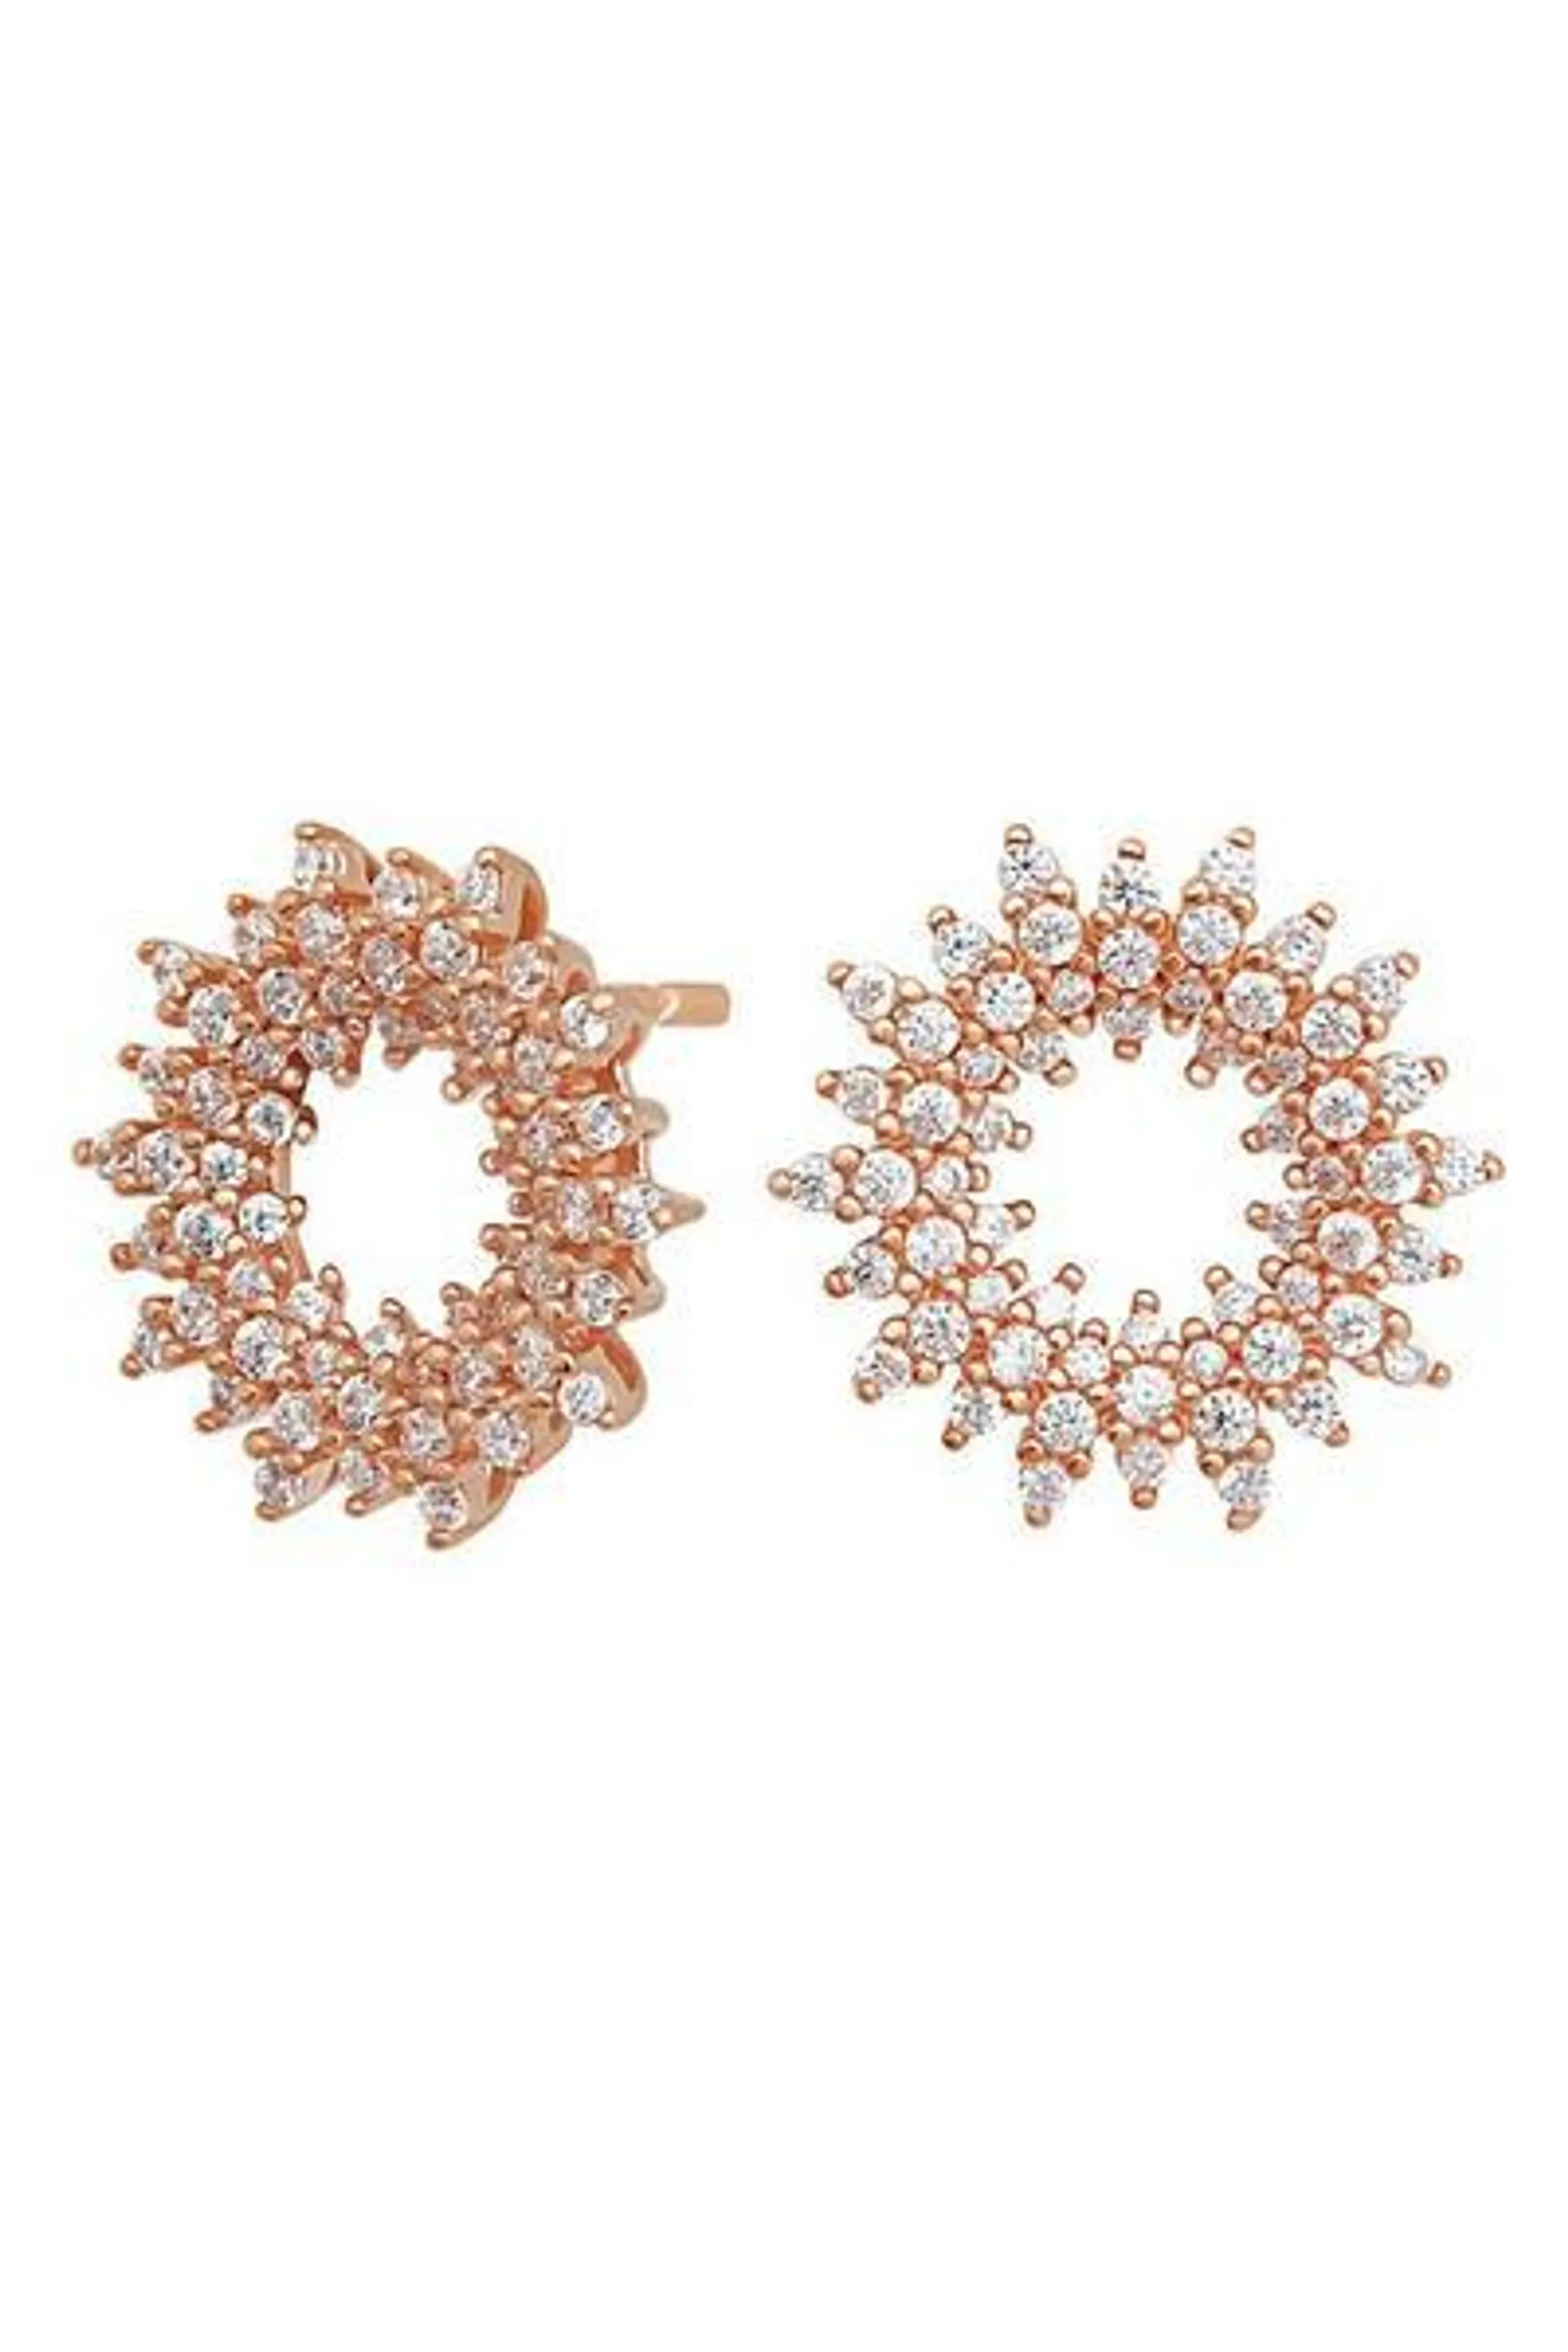 Sterling Silver 925 14ct Rose Gold With Cubic Zirconia Round Earrings